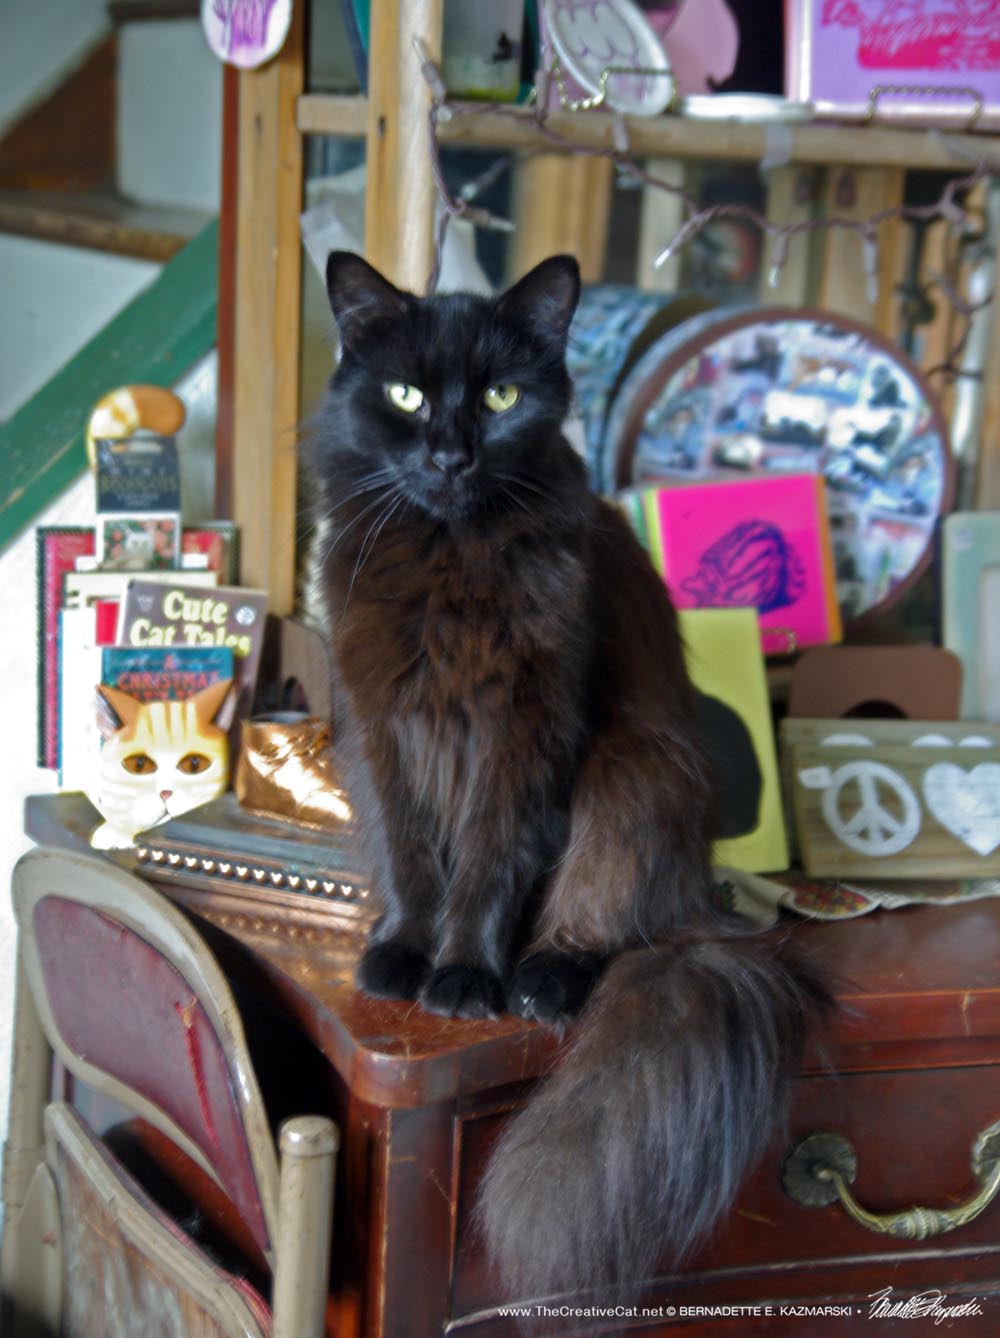 Hamlet welcomes you to Black Cat Friday